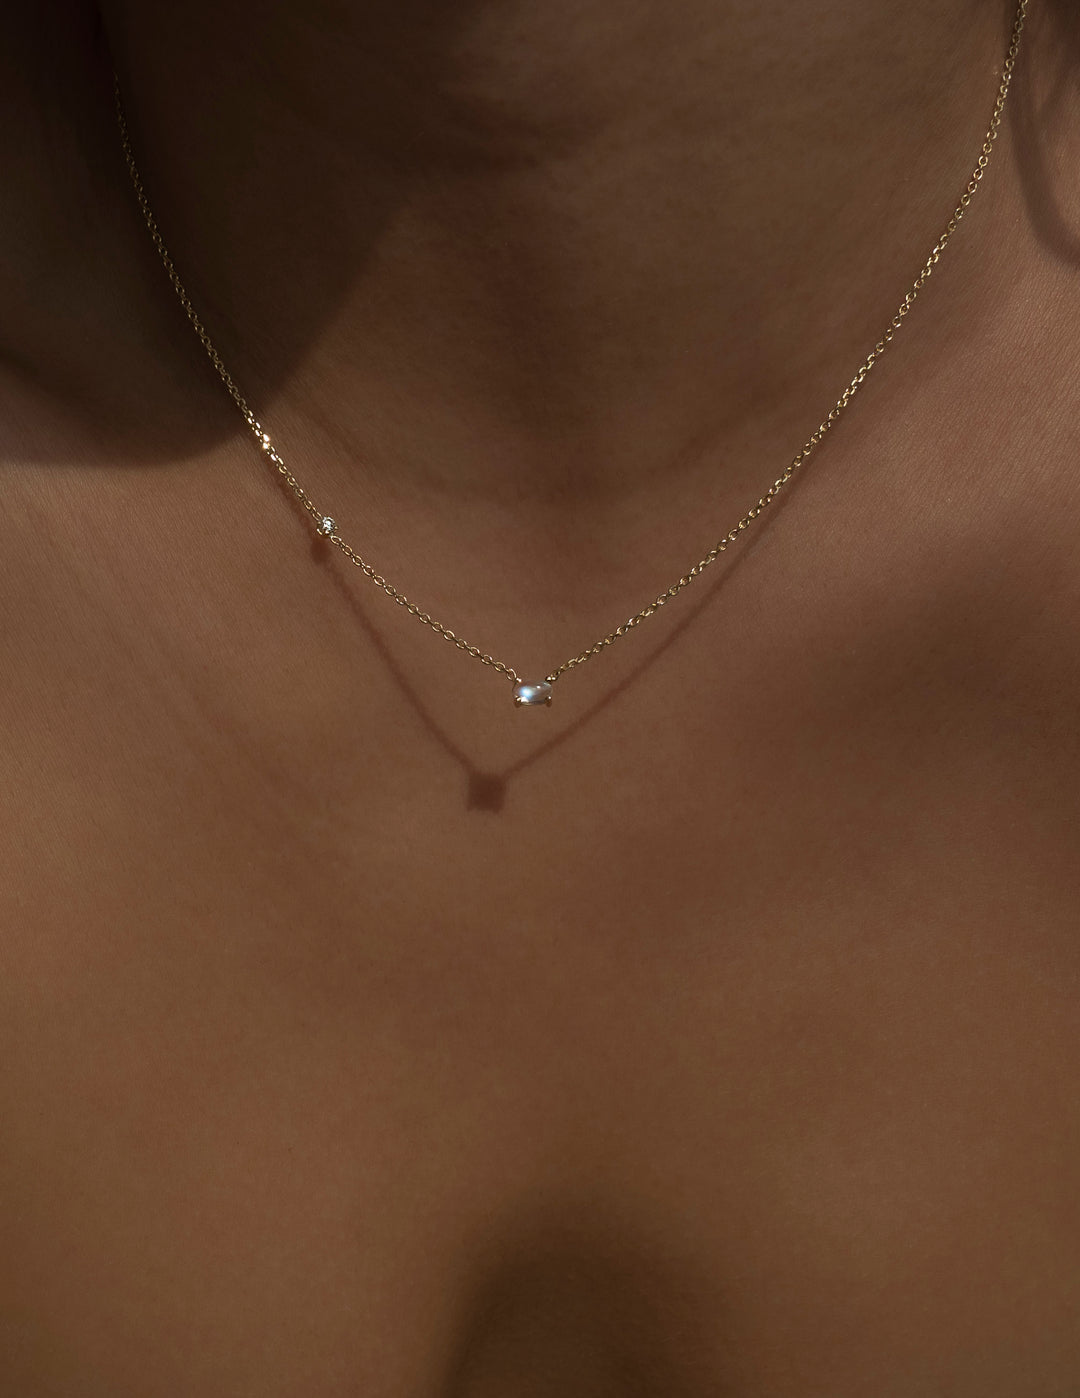 Oval Moonstone and Diamond Necklace